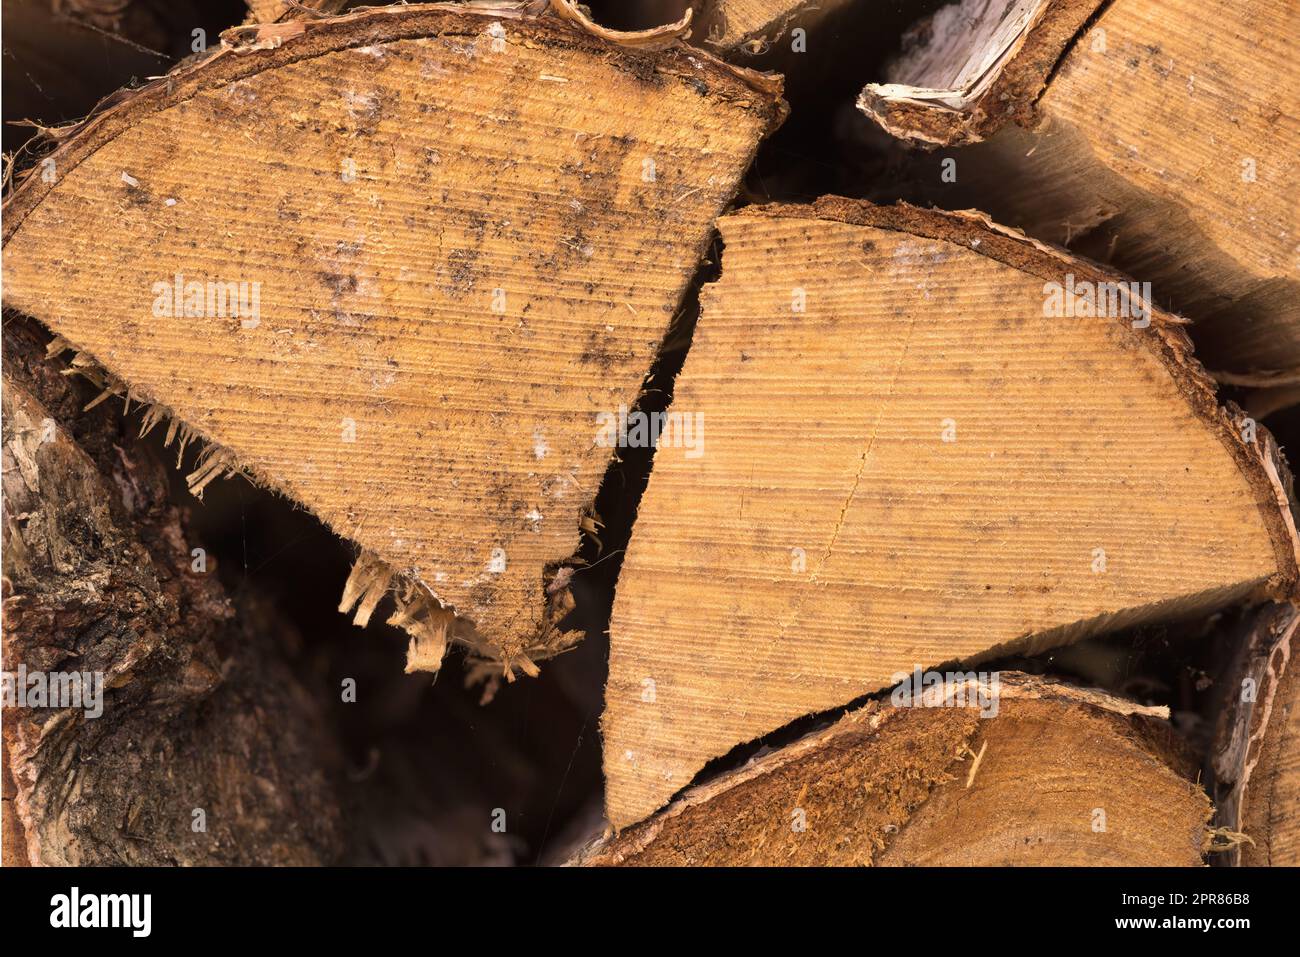 Preparation of firewood for the winter. Stacks of firewood in the forest. Firewood background. Sawed and chopped trees. Stacked wooden logs.. Firewood. Stock Photo